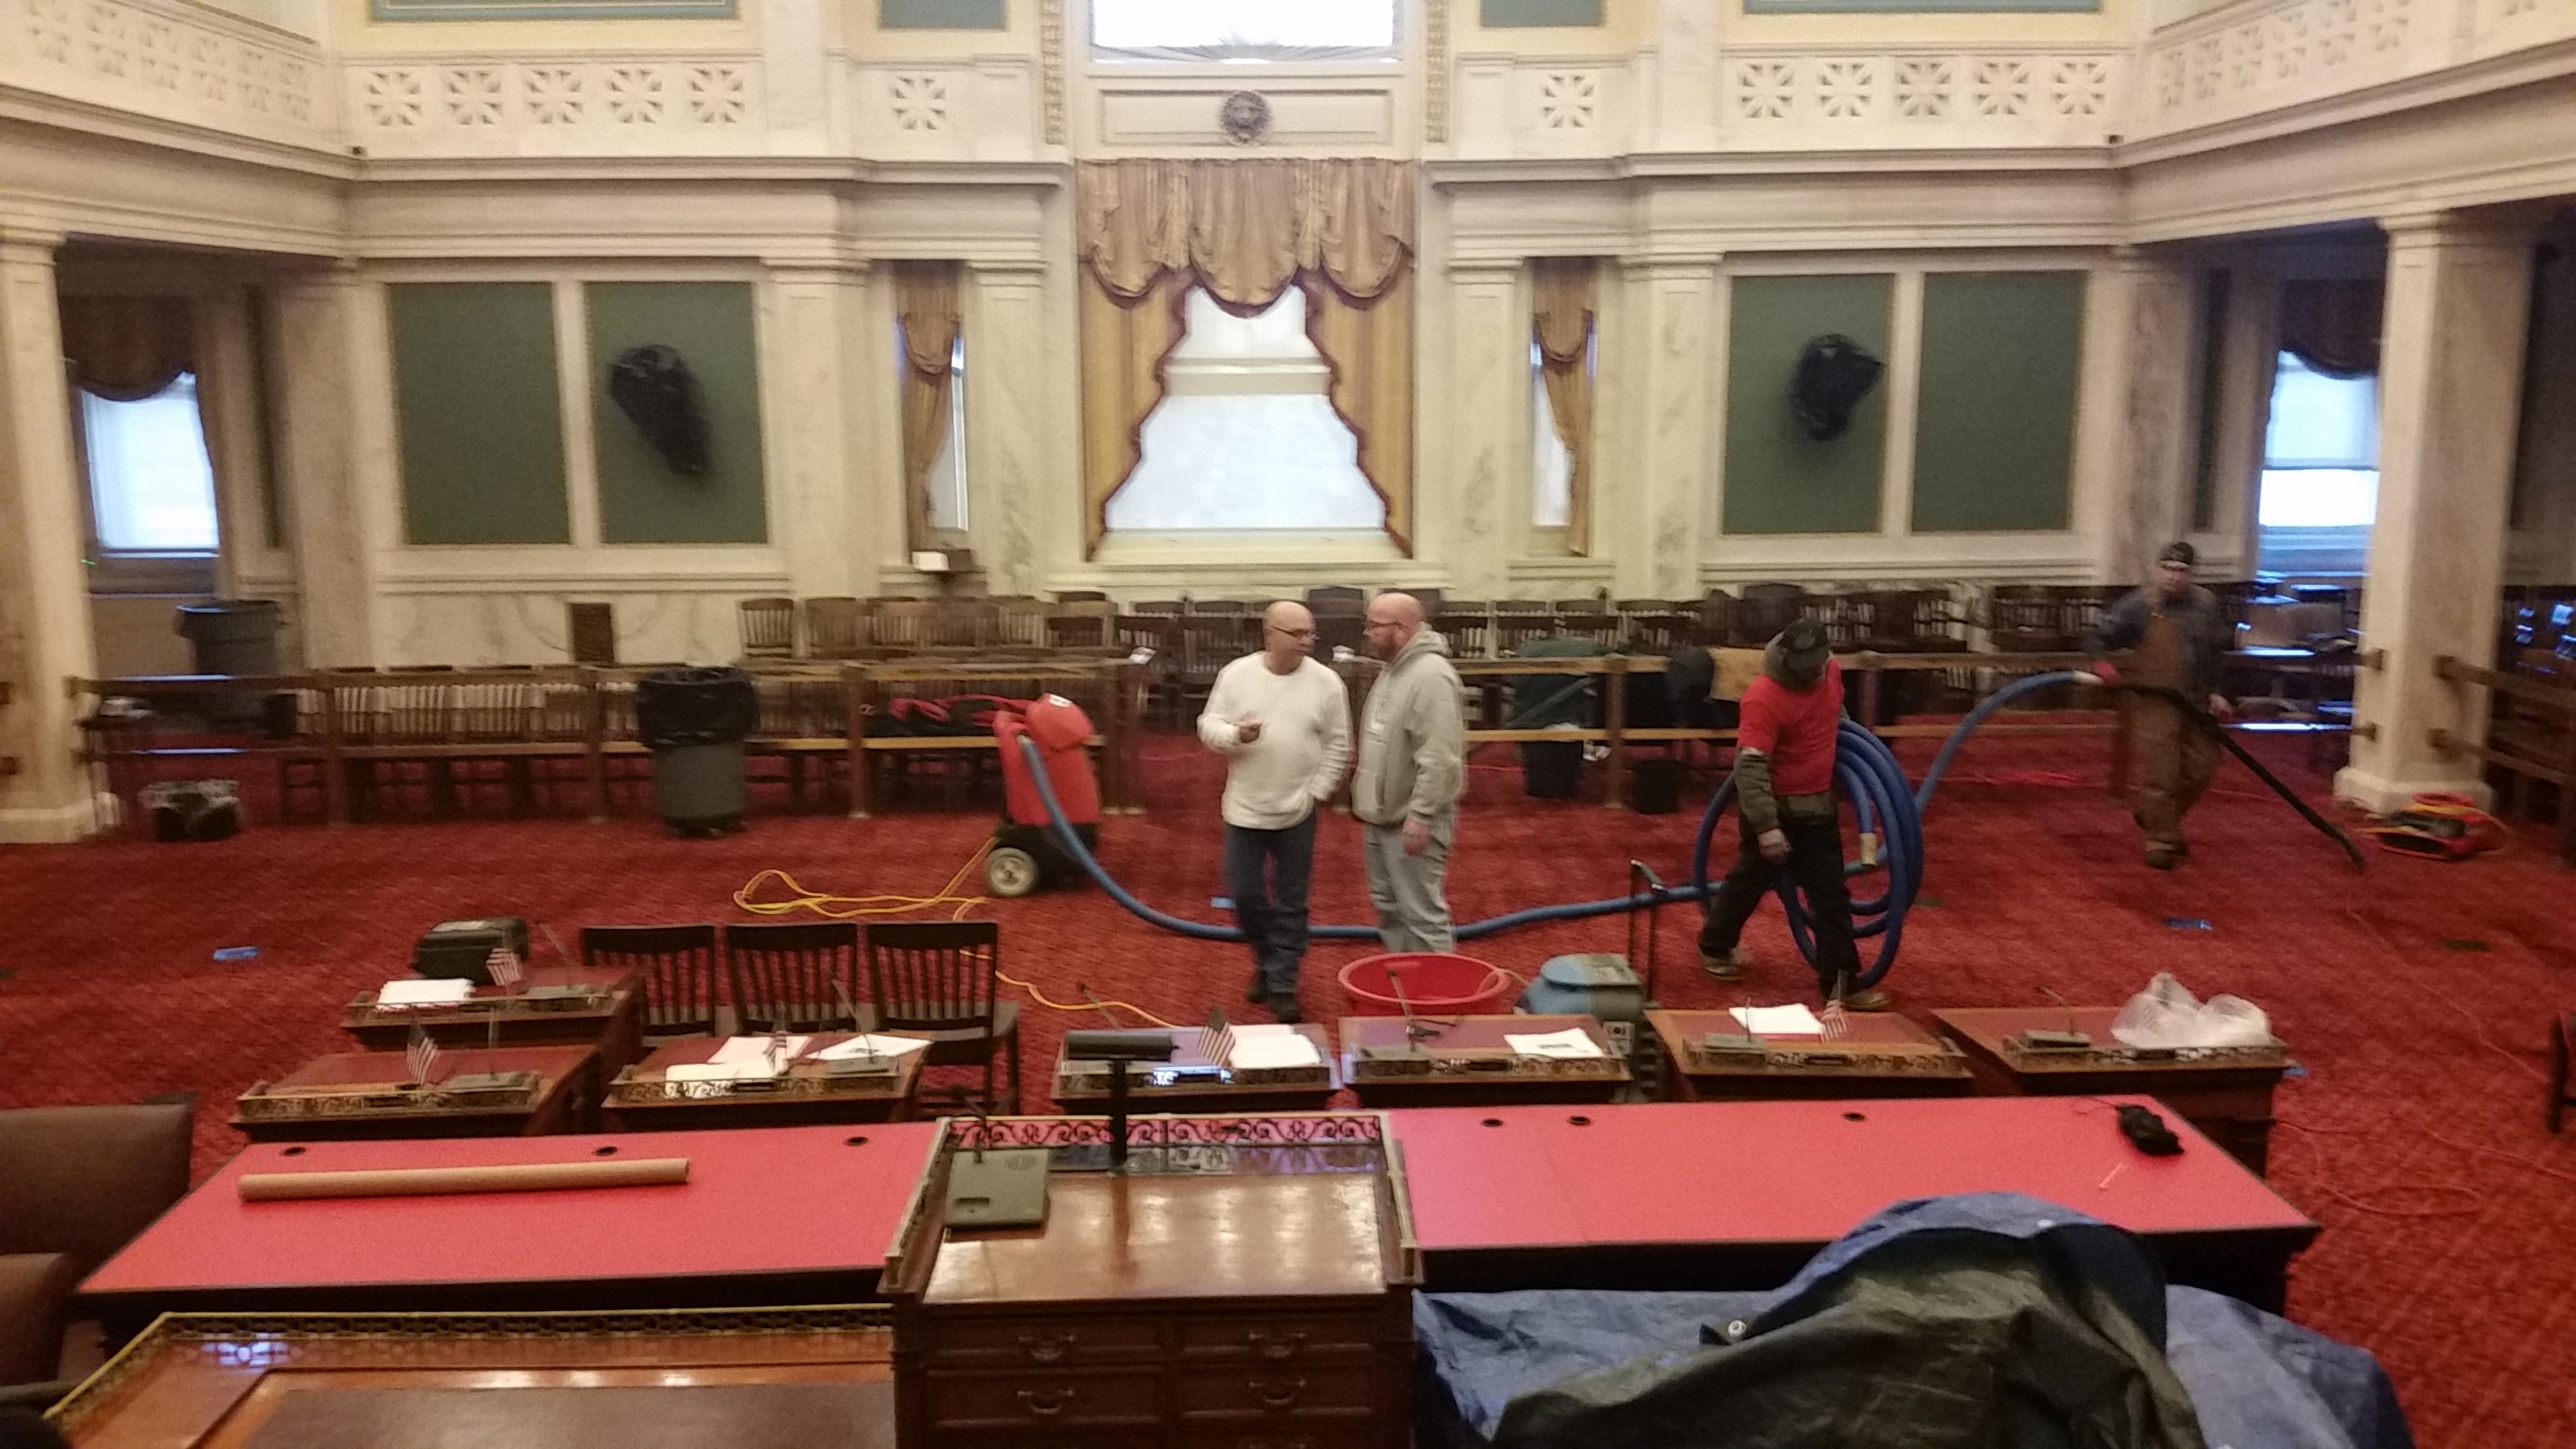  A crew works to clean up Philadelphia City Council chambers. (Tom MacDonald/WHYY) 